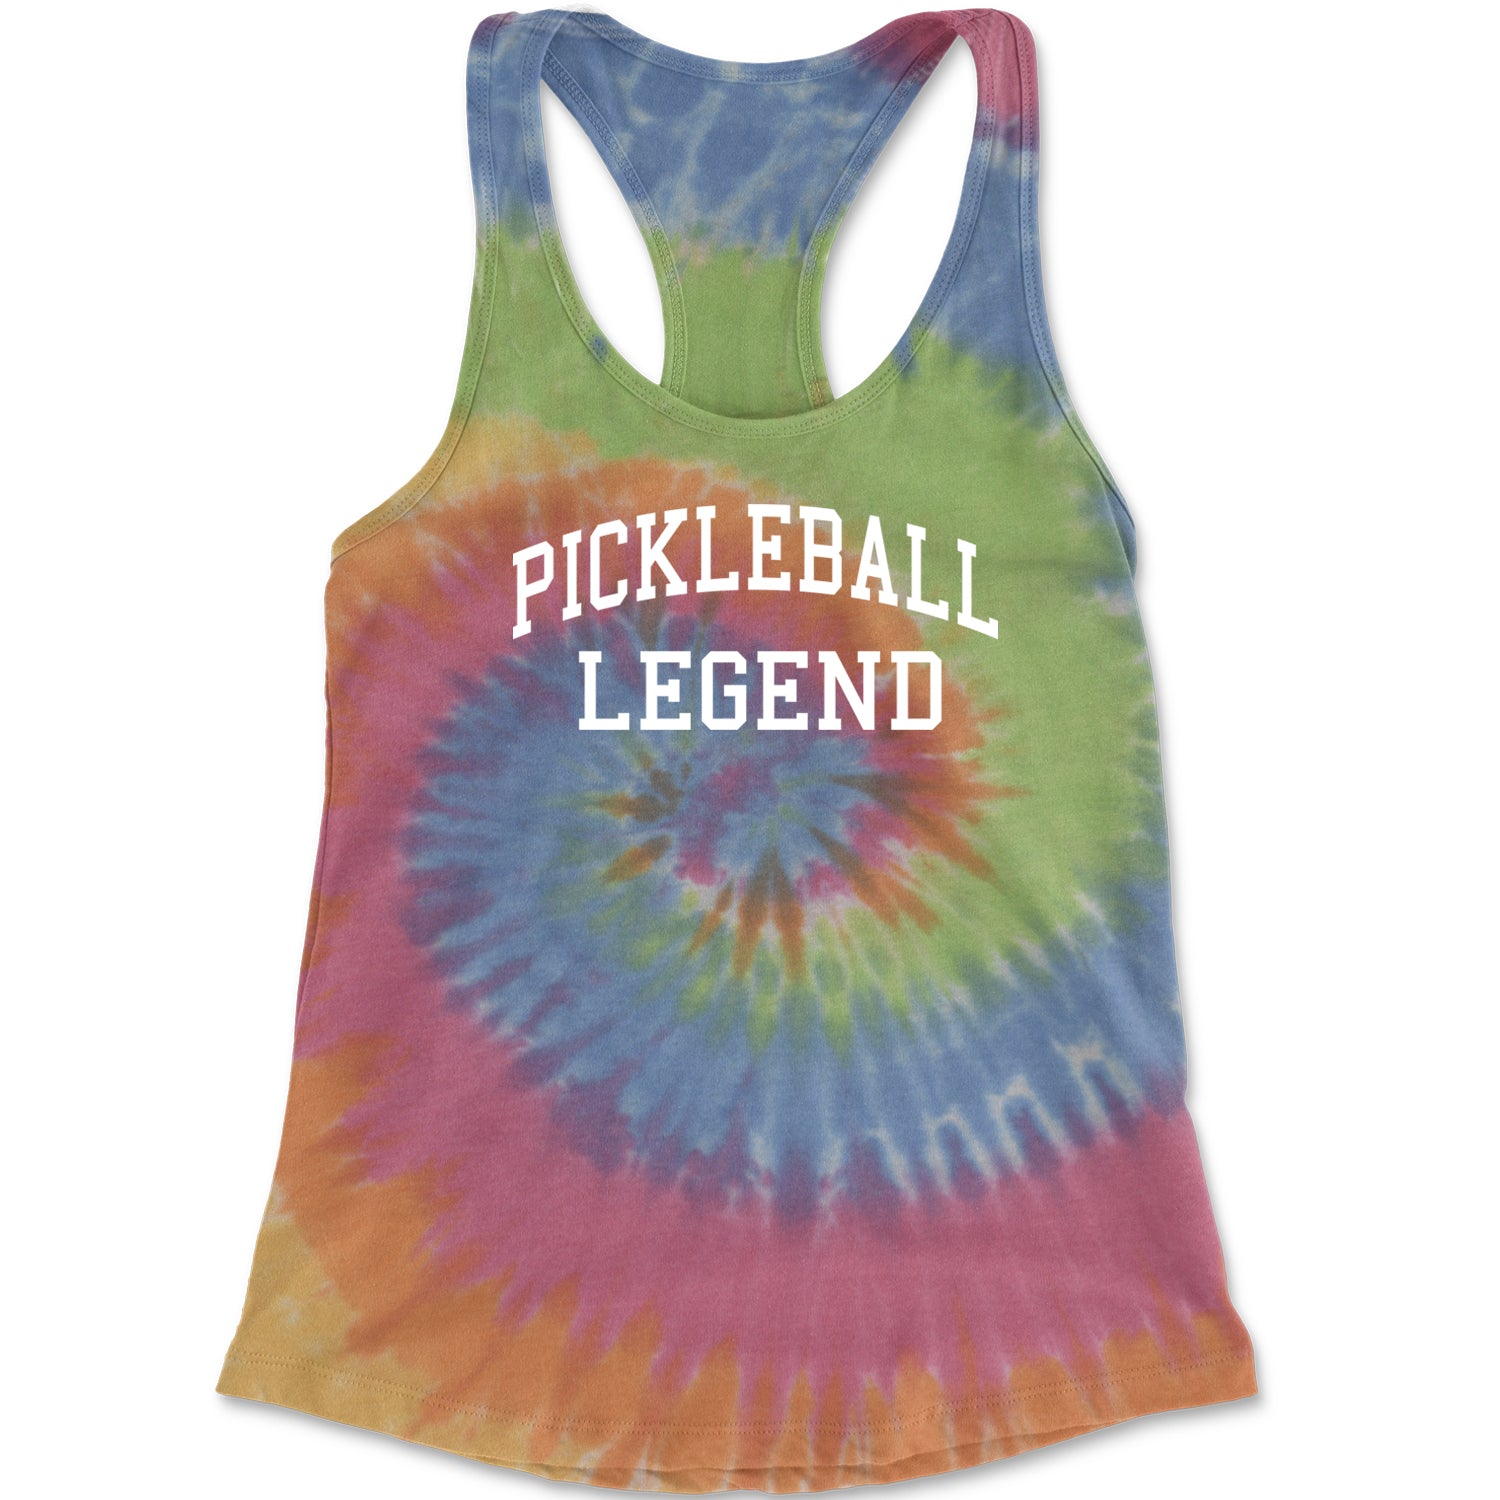 Pickleball Legend Racerback Tank Top for Women ball, dink, dinking, pickle, pickleball by Expression Tees